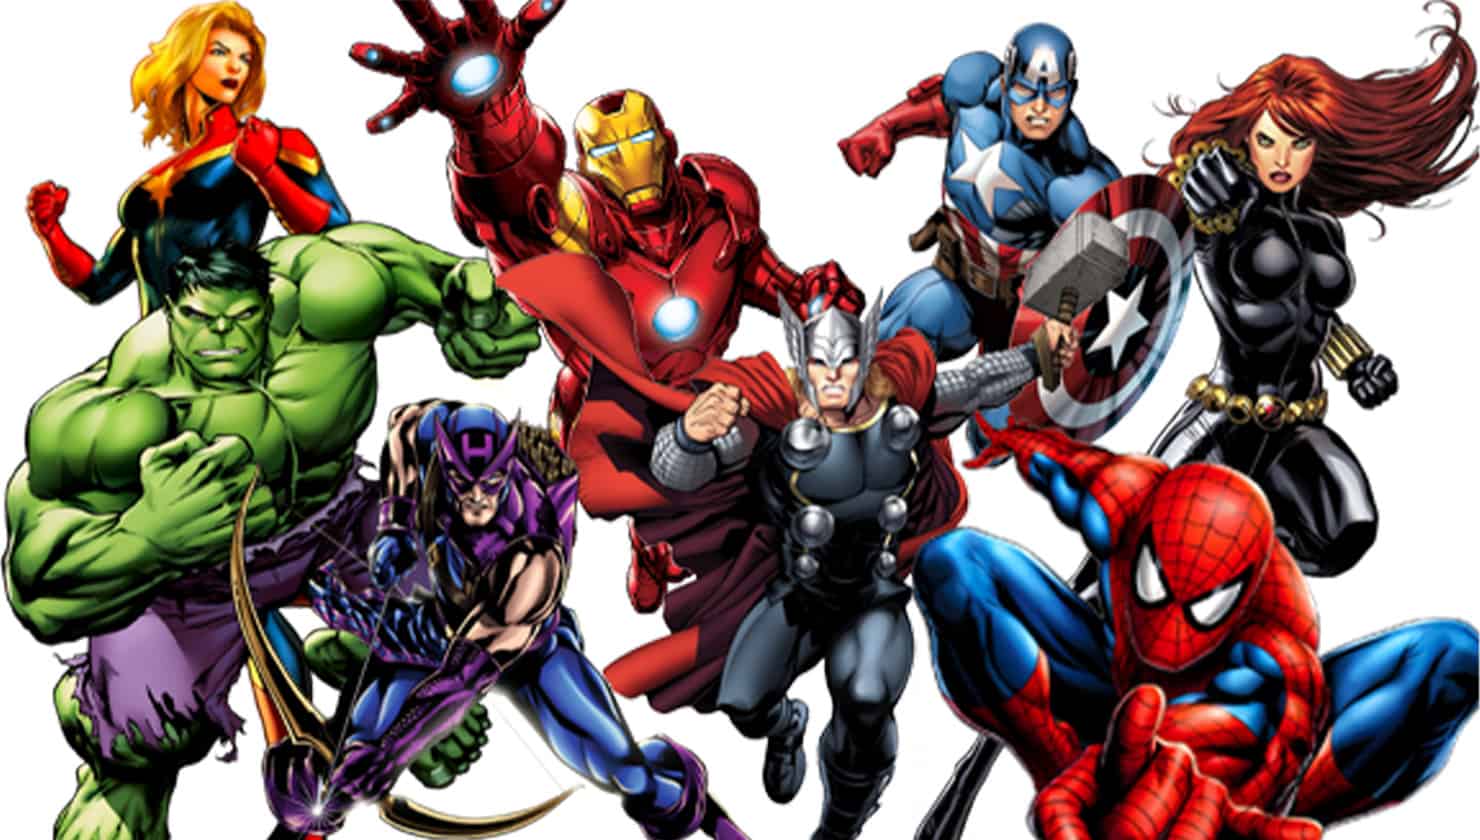 Which Avenger are you?